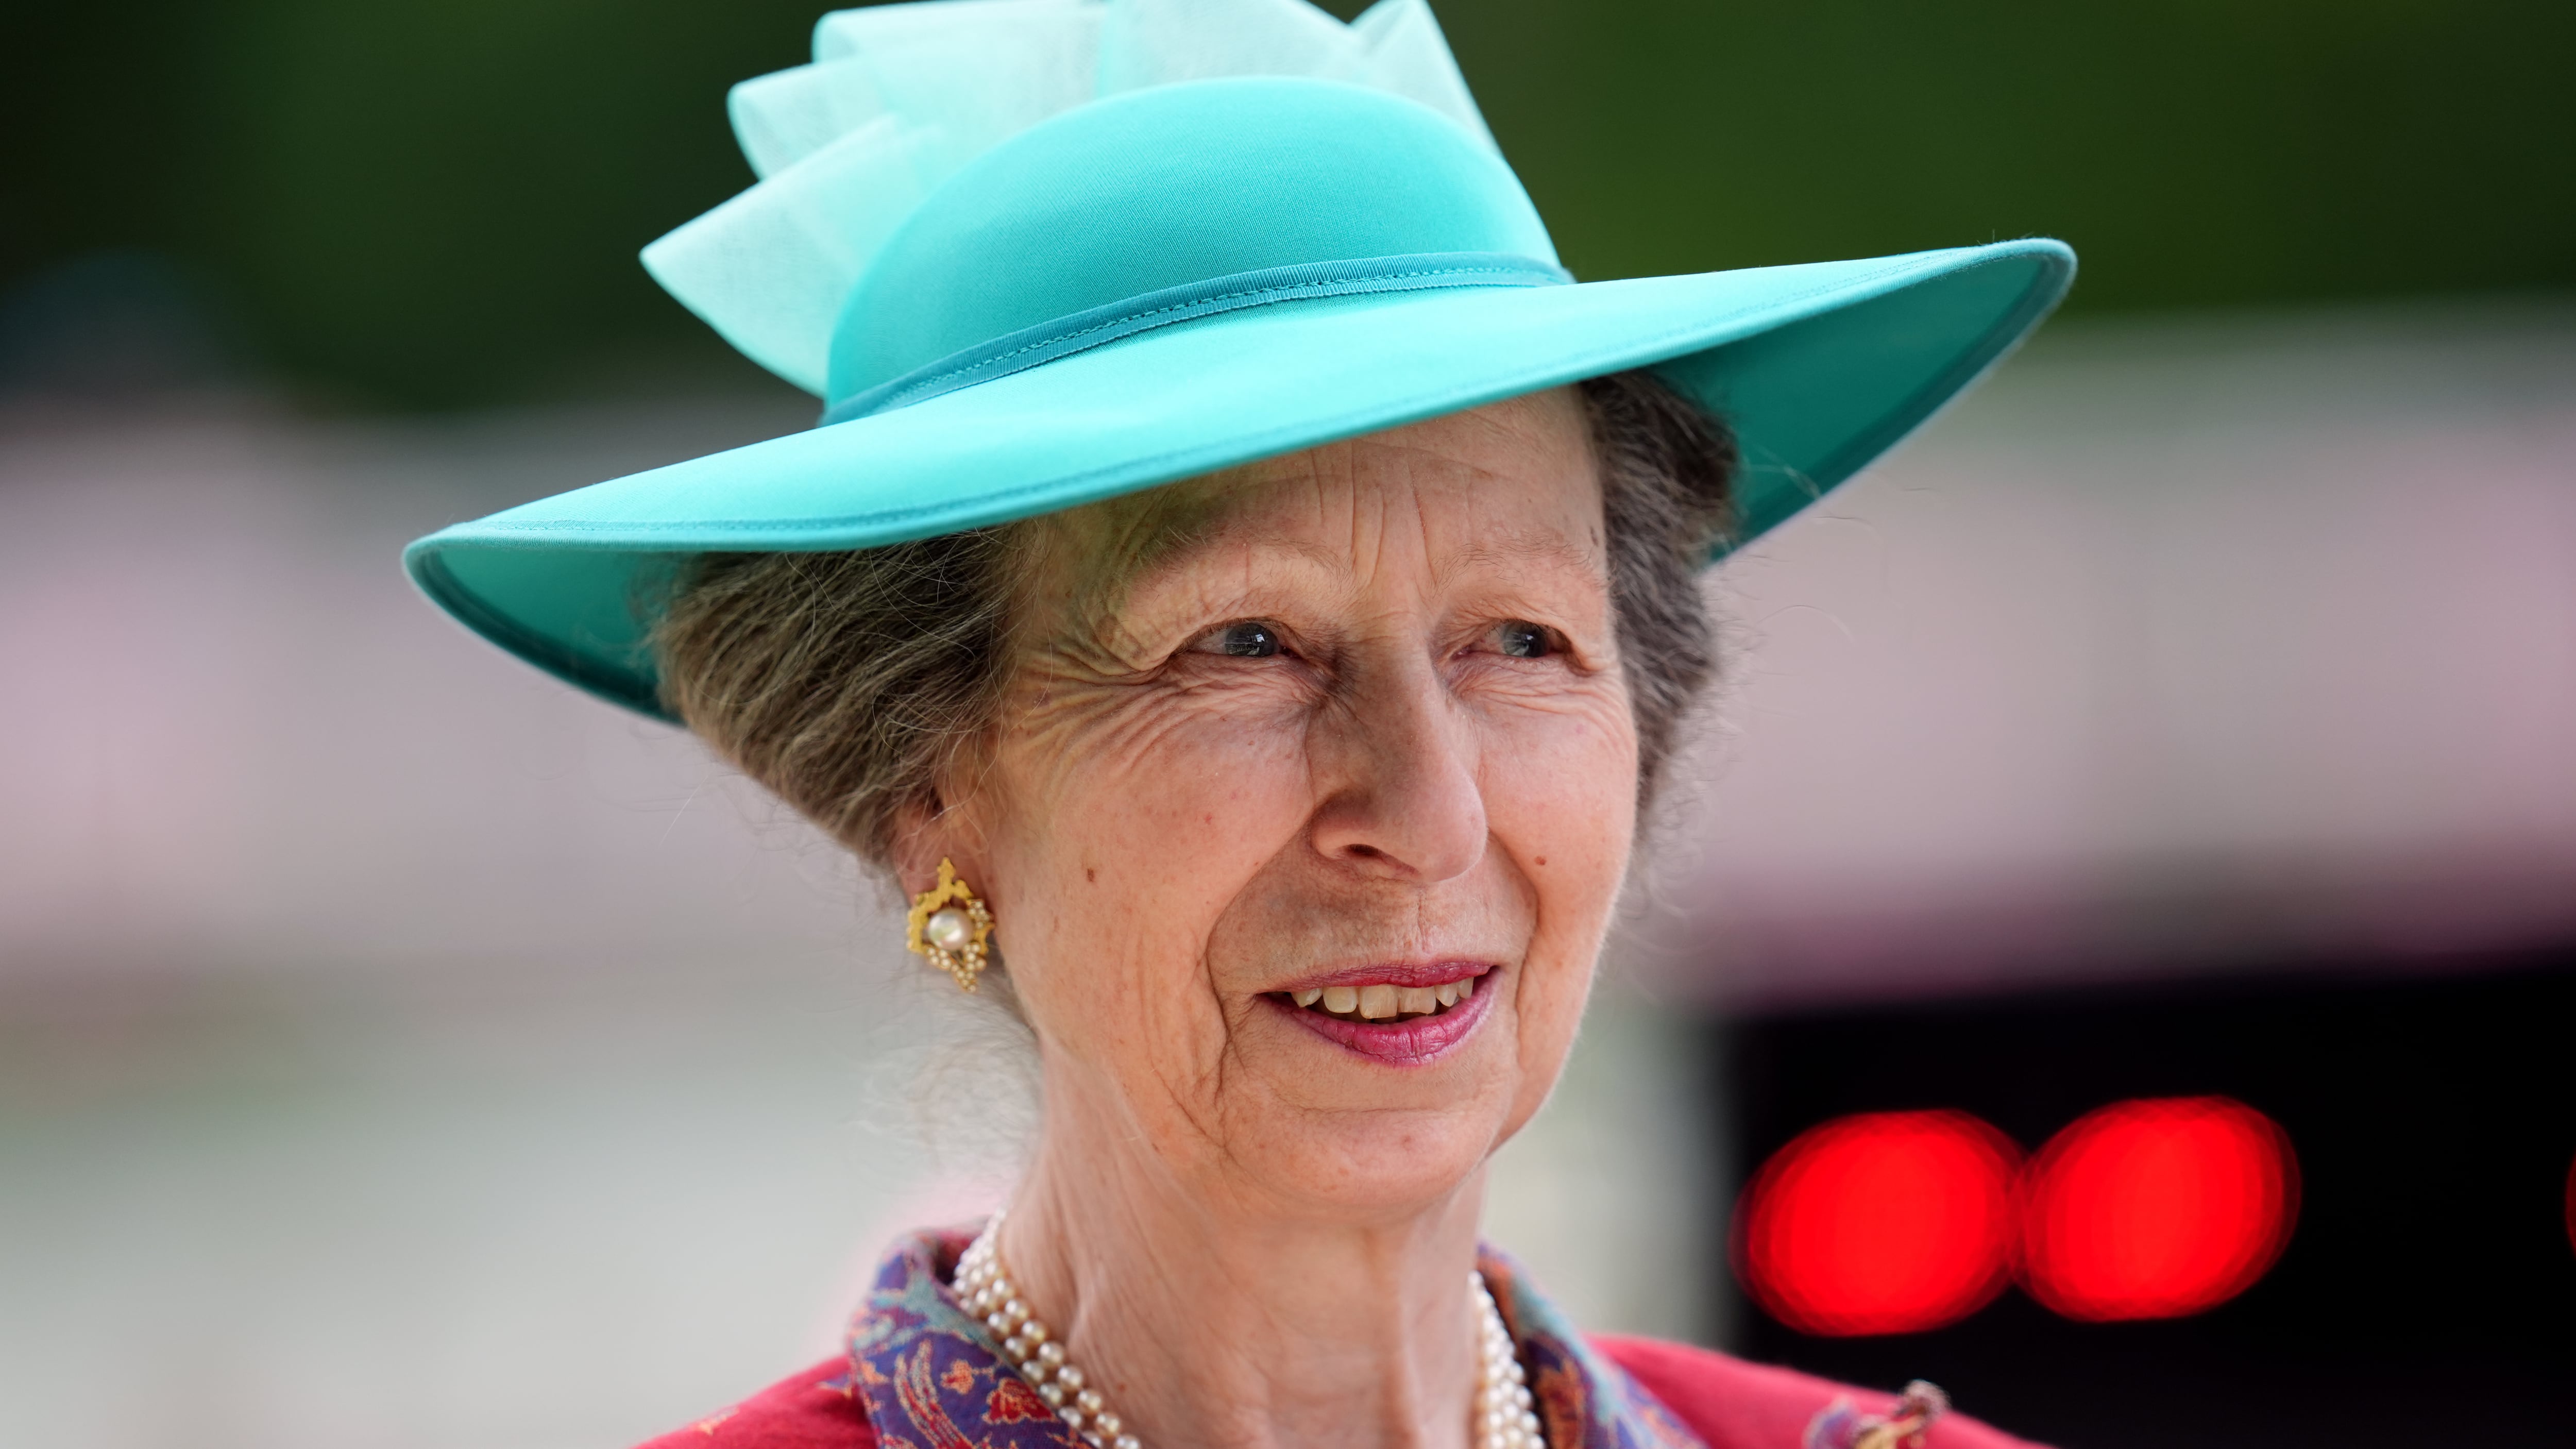 The Princess Royal at the Royal Windsor Horse Show in Windsor, Berkshire, in May